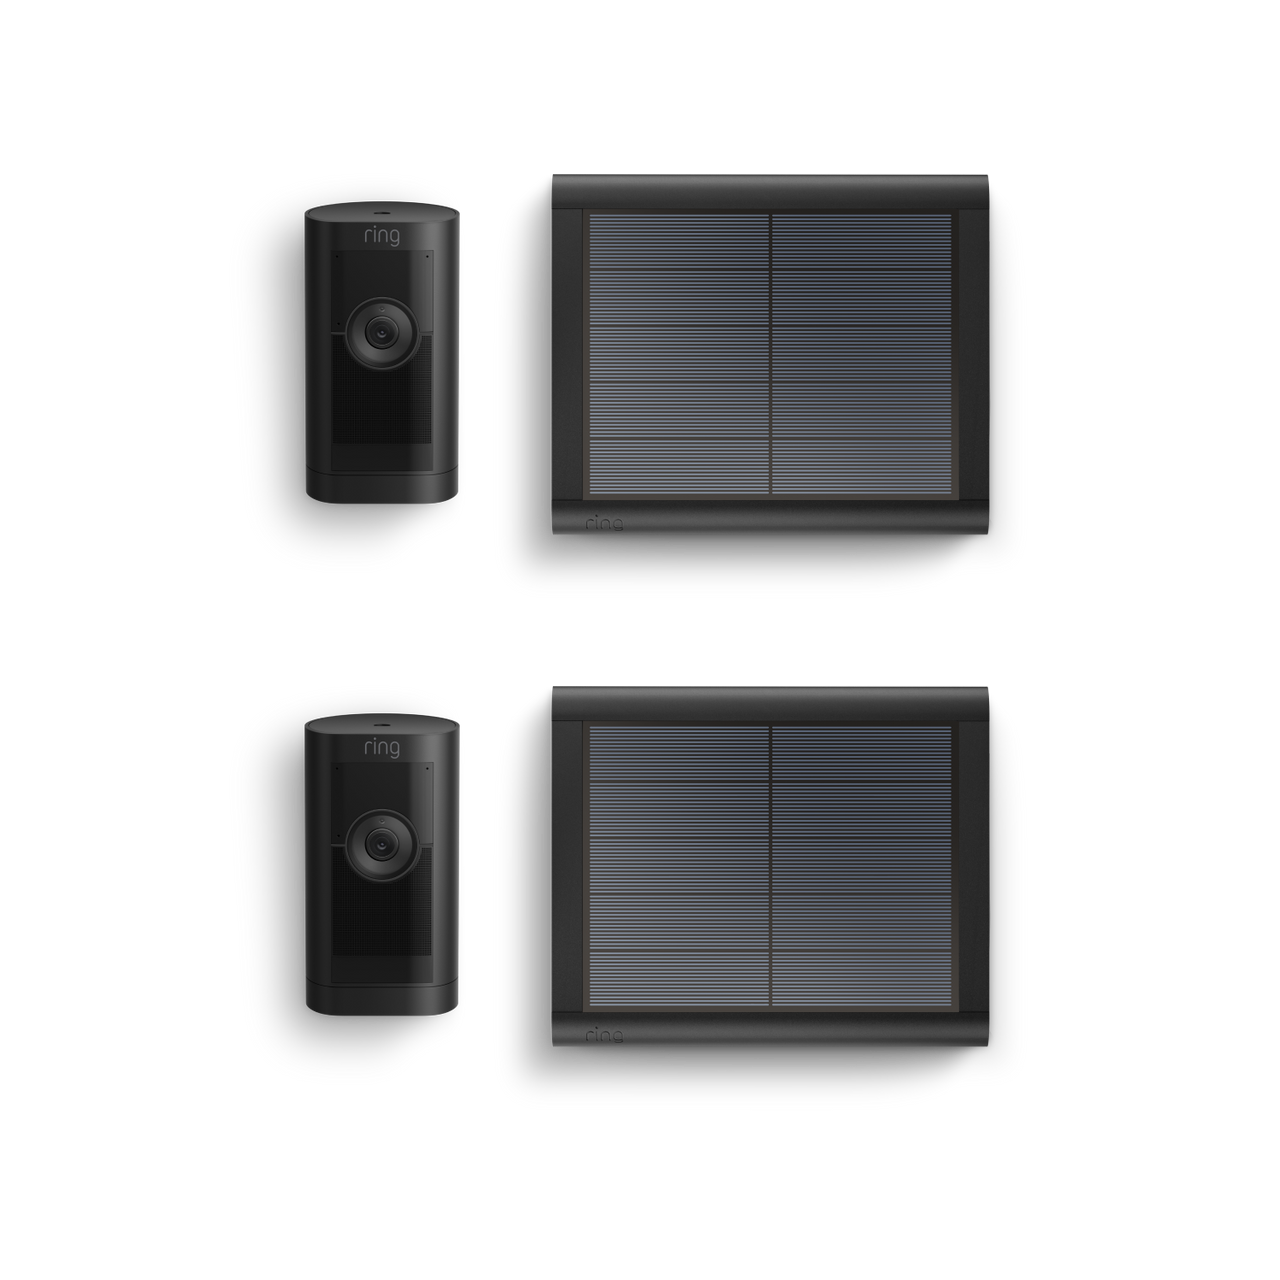 files/ring_stick-up-cam-pro-solar_blk_2pk_01_product_angle_wall_1500x1500_167b57dc-015a-4978-b881-076225d6738f.png